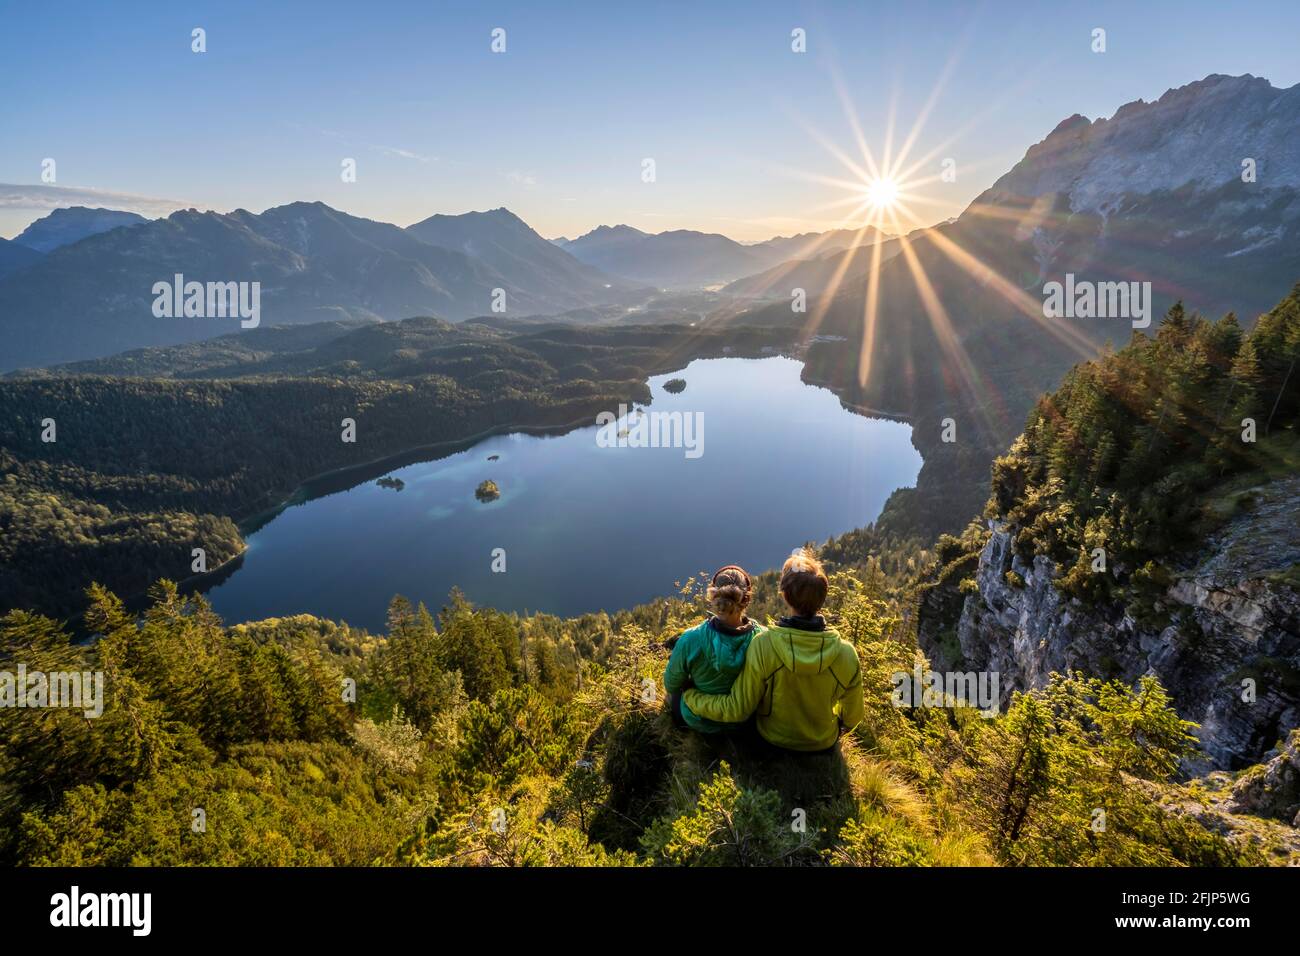 Two (hikers) looking at Eibsee lake at sunrise, sun shining over Bavarian alpine foothills, right Zugspitze, Wetterstein mountains near Grainau Stock Photo